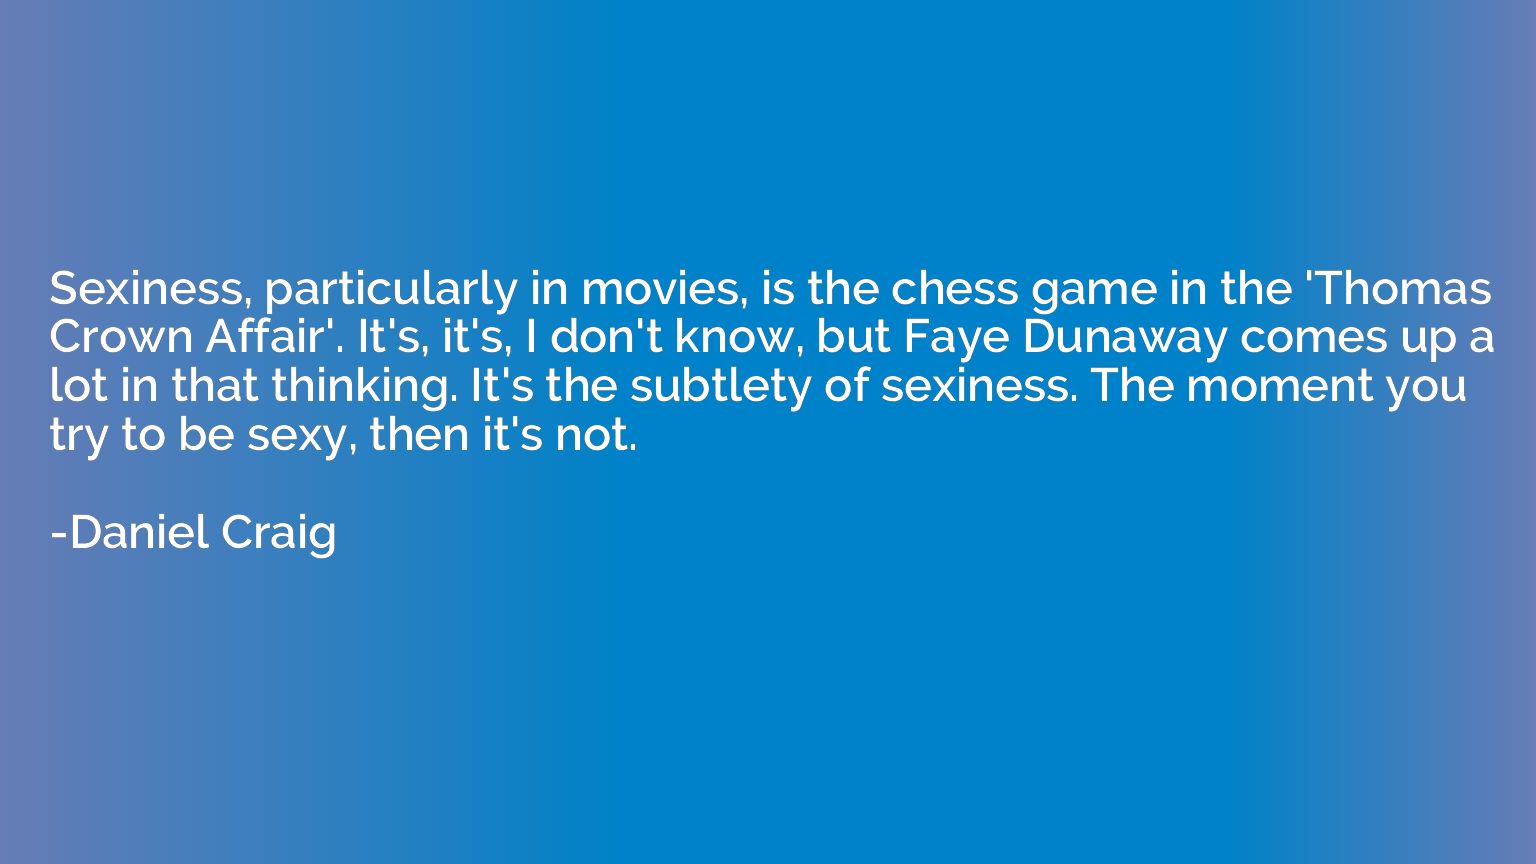 Sexiness, particularly in movies, is the chess game in the '